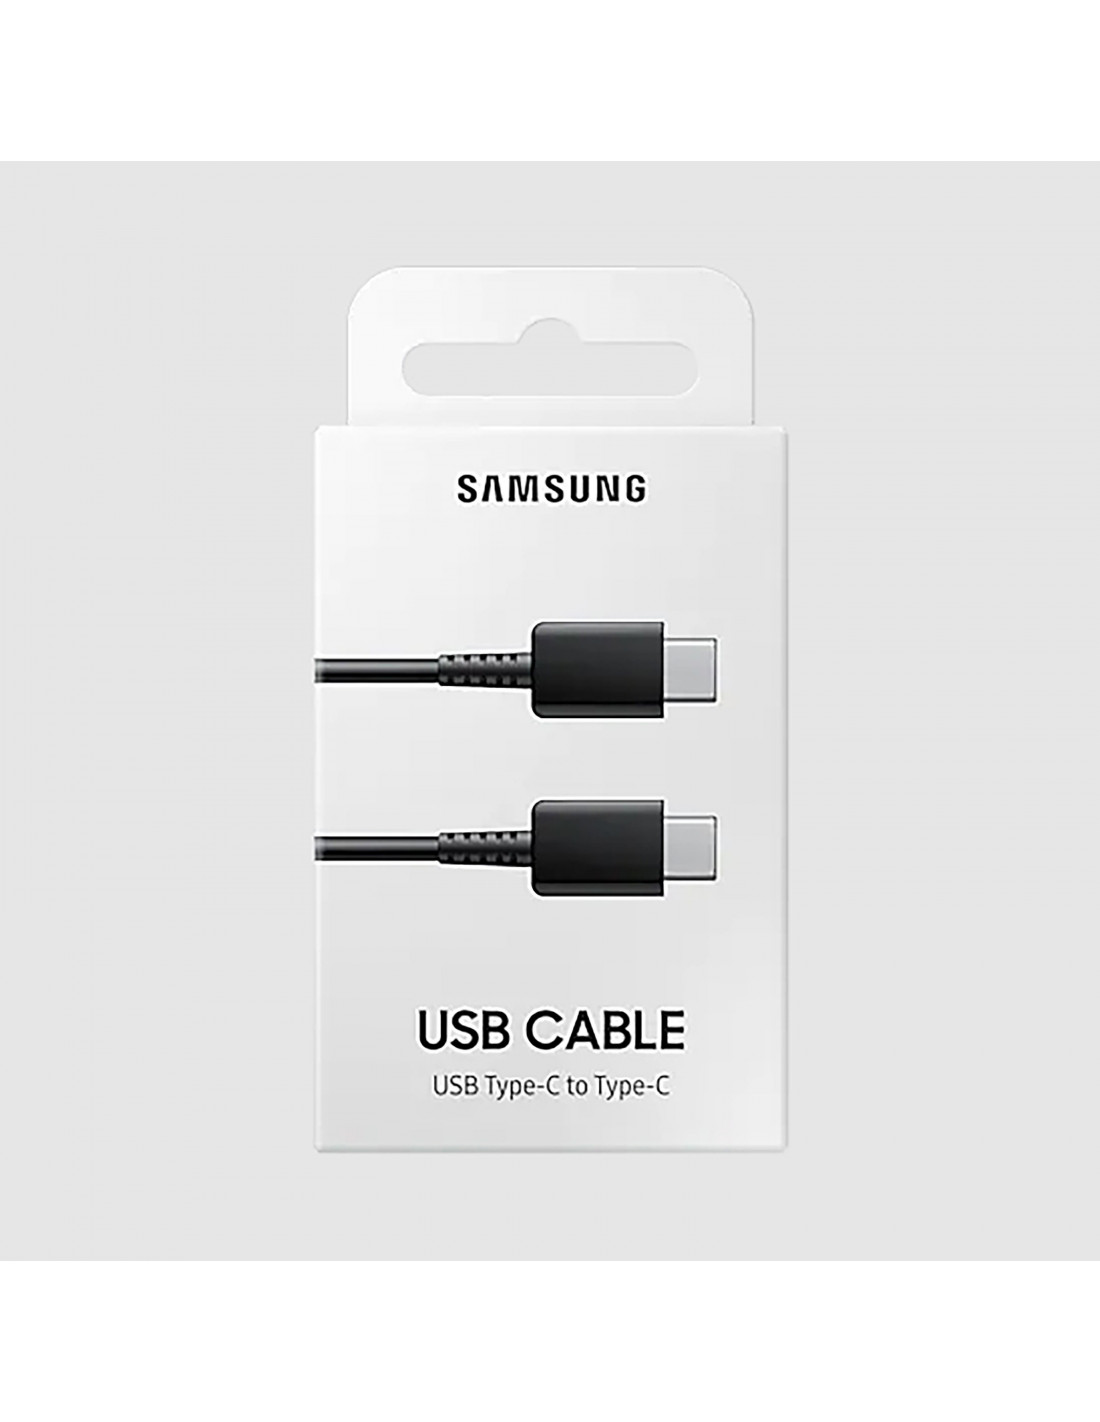 Samsung cable Tipo C-Tipo C 1m negro